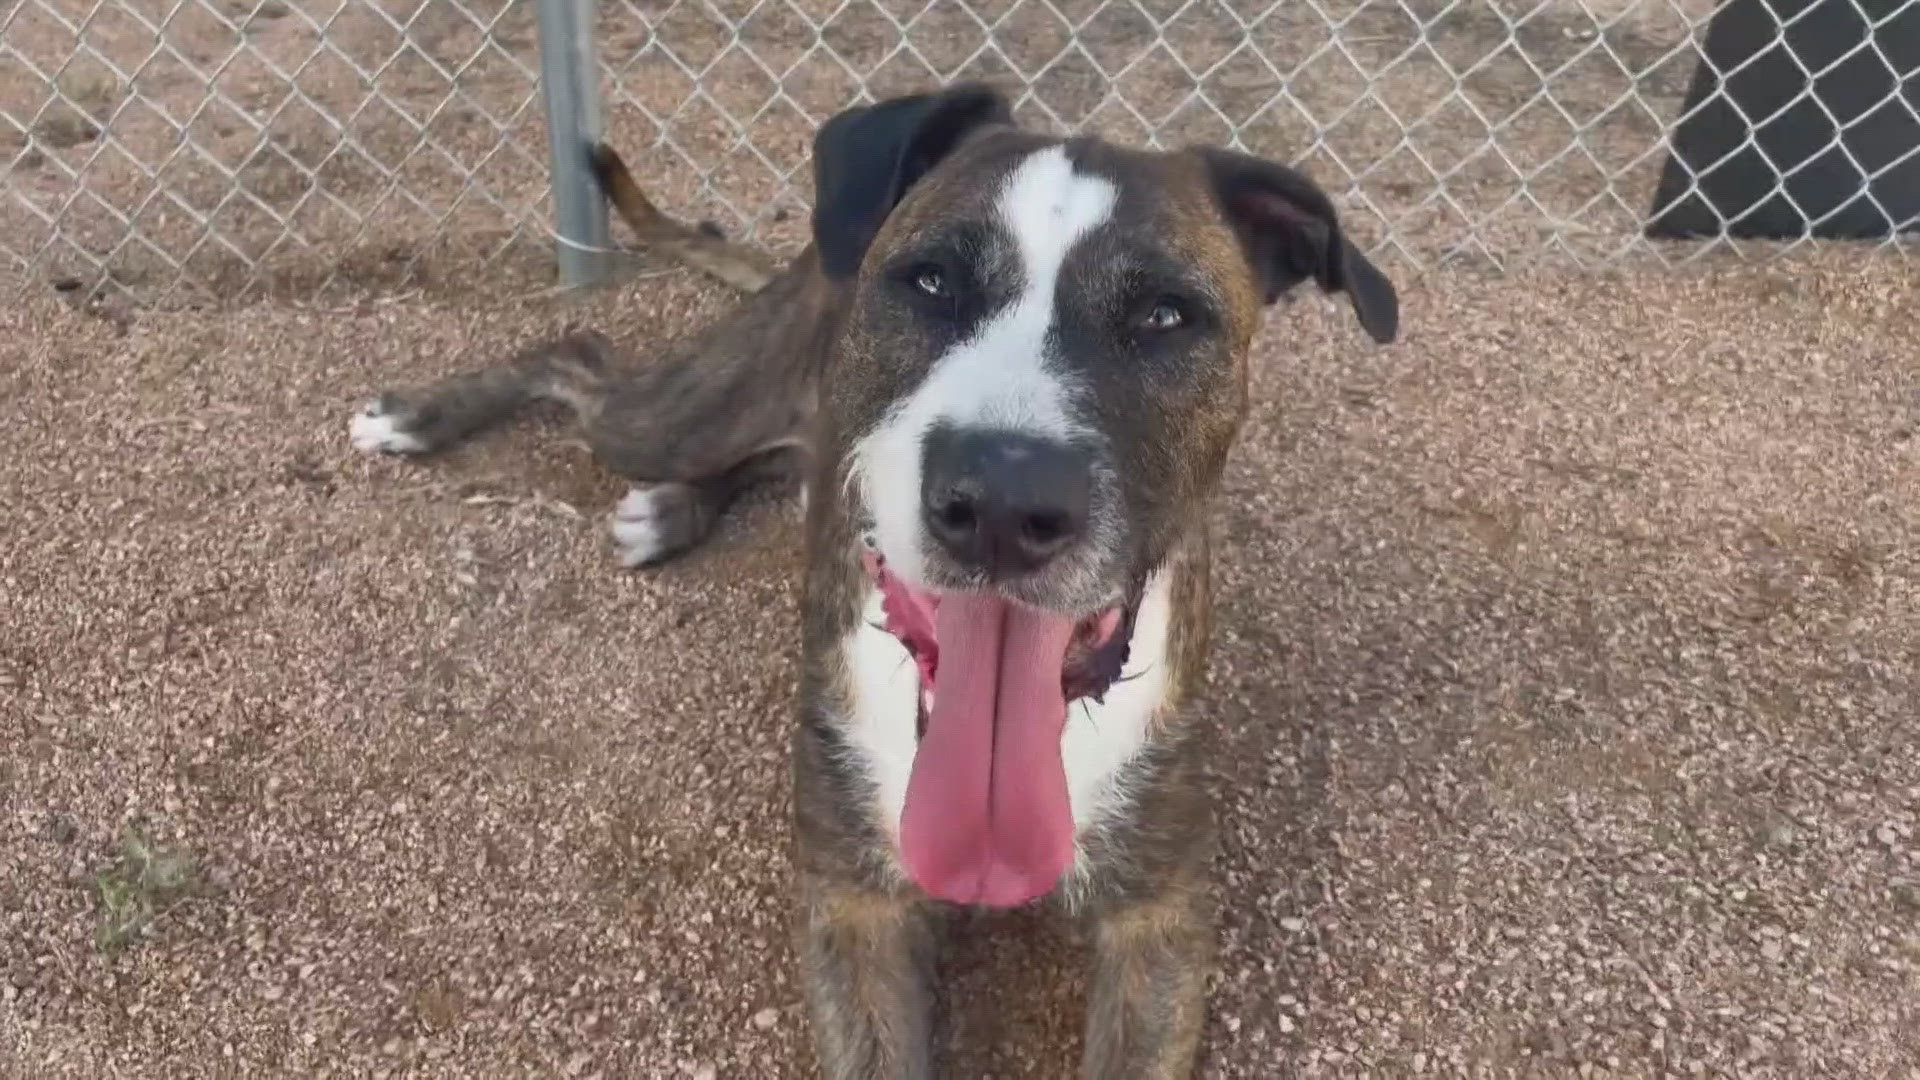 Yadi is waiting for his forever home at the Killeen Animal Shelter.